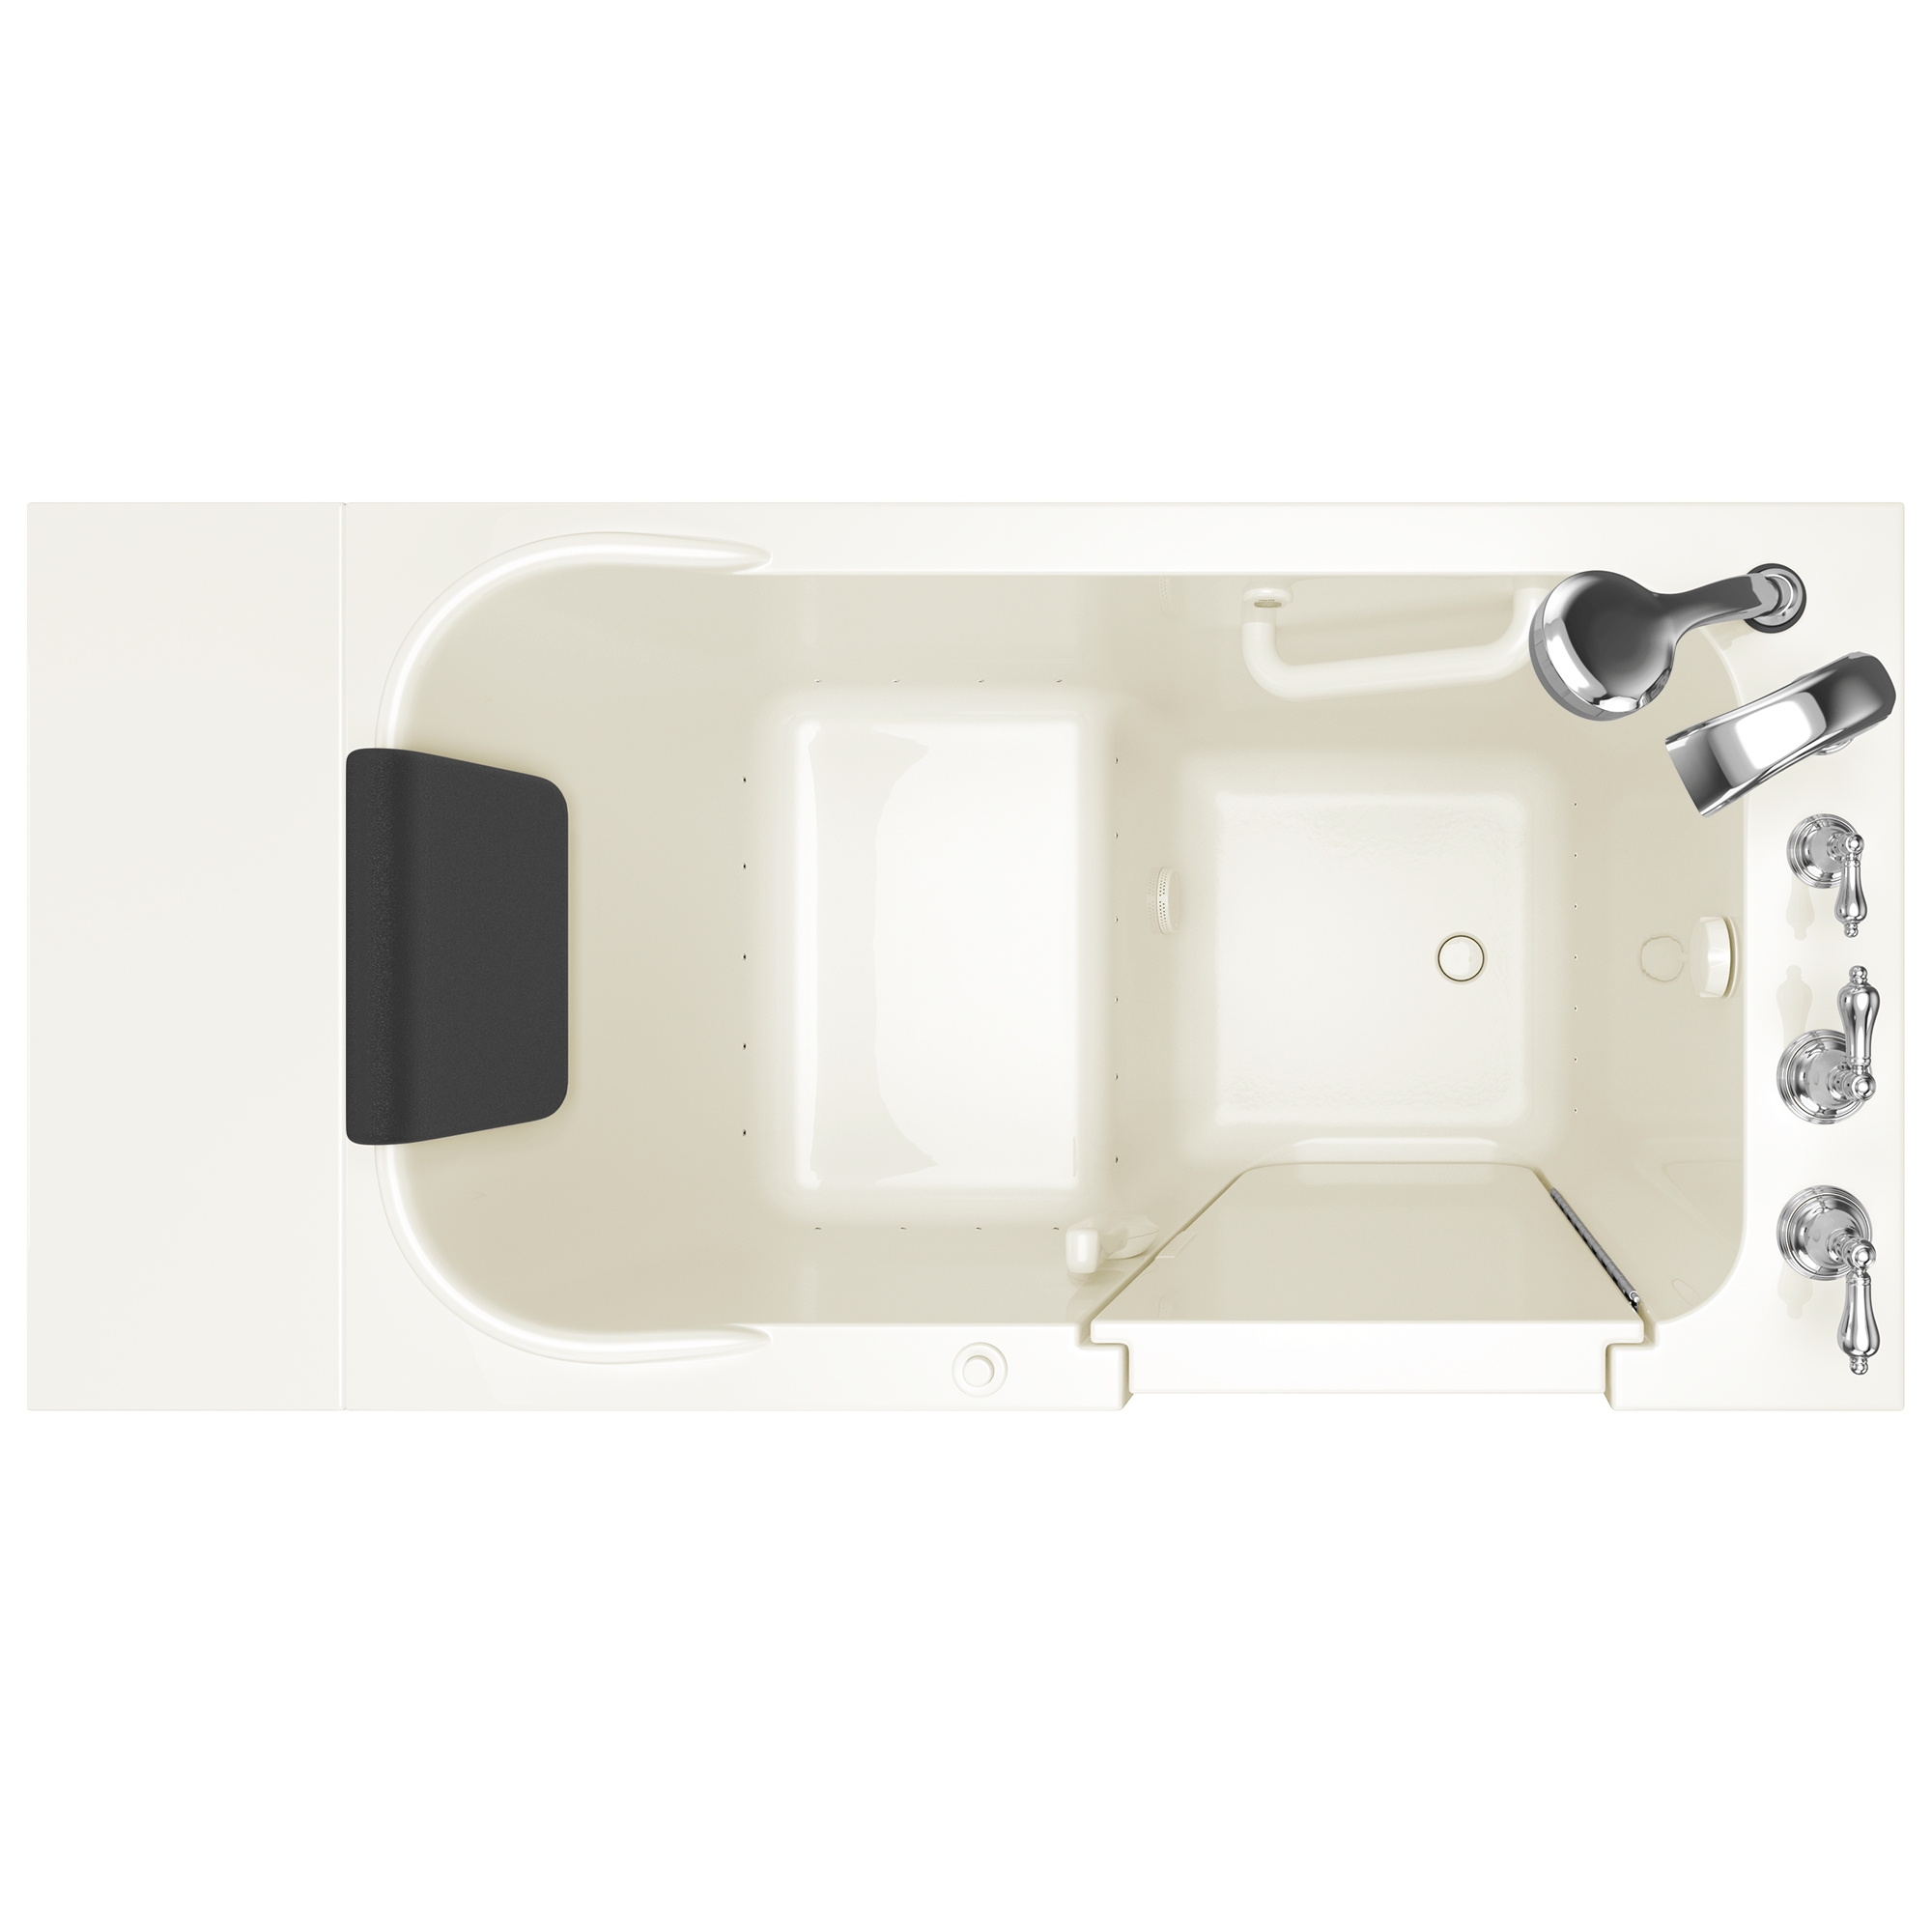 Gelcoat Premium Series 28 x 48 Inch Walk in Tub With Air Spa System   Right Hand Drain With Faucet WIB LINEN